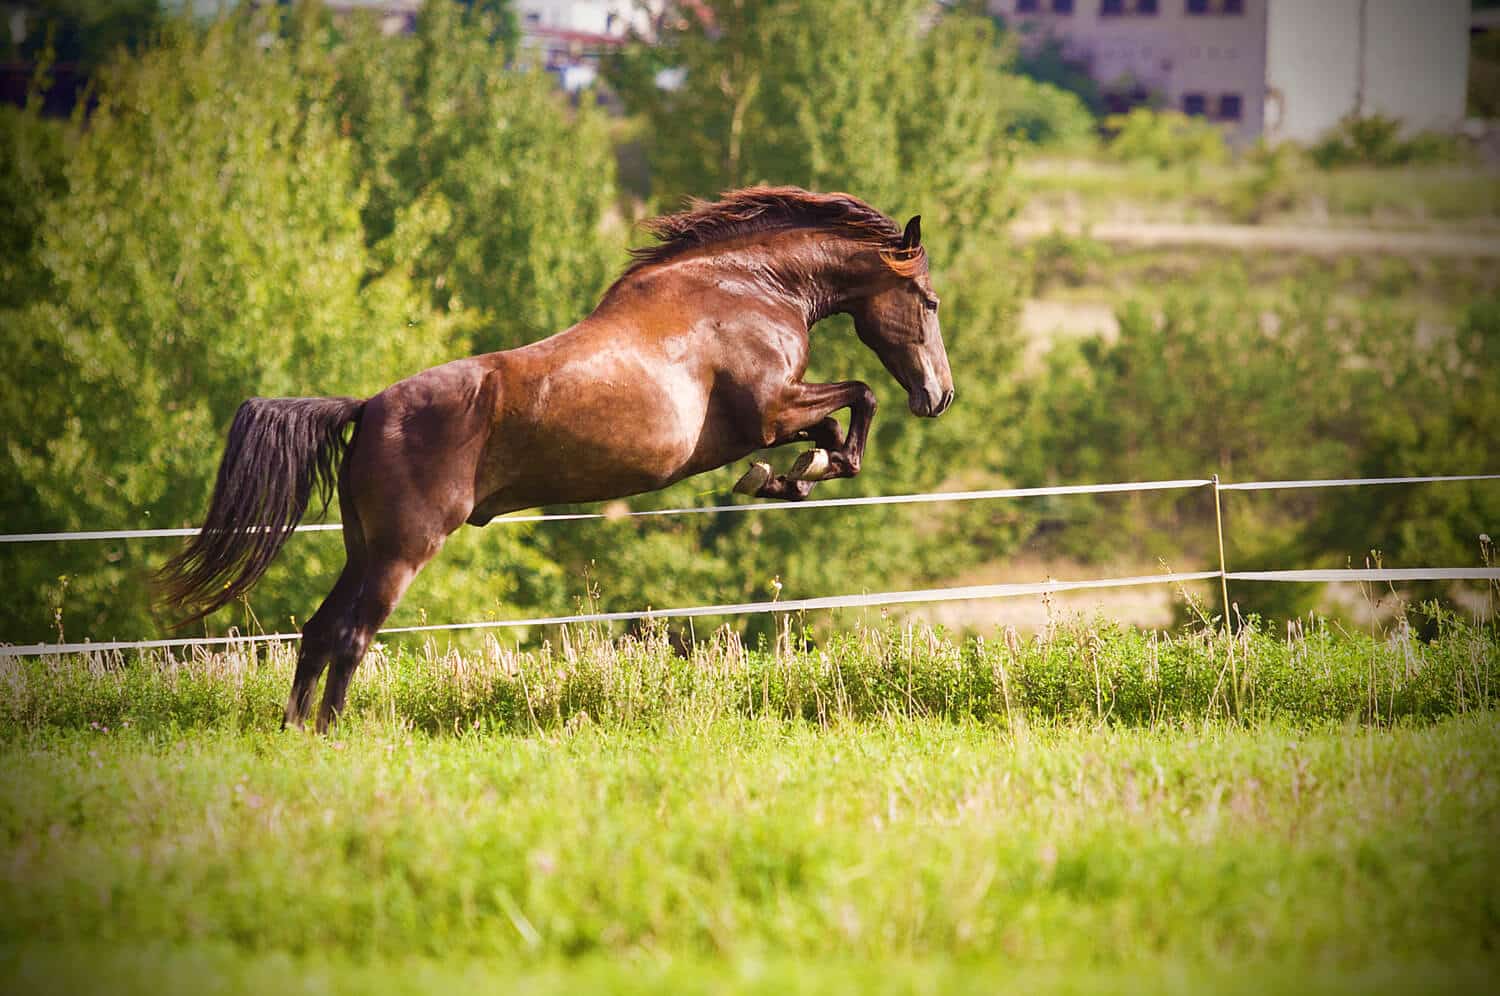 Arthritis prevention is all about protecting your horse’s joints